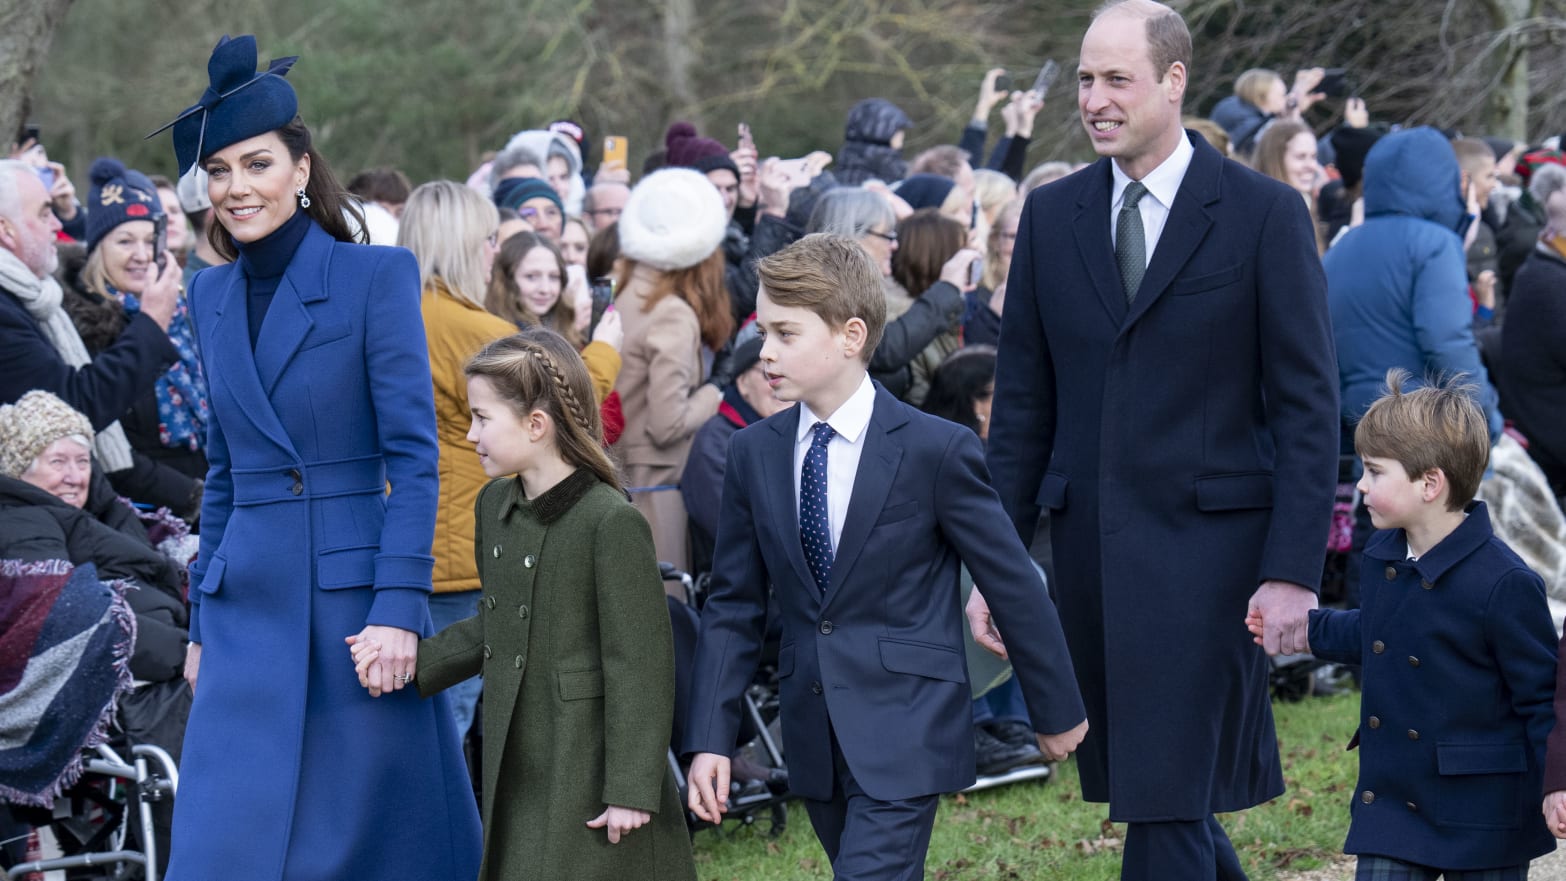 Catherine, Princess of Wales (L) and Prince William, Prince of Wales (2nd R) with Prince Louis of Wales (R), Prince George of Wales (C) and Princess Charlotte of Wales (2nd L) attend the Christmas Day service at St Mary Magdalene Church on December 25